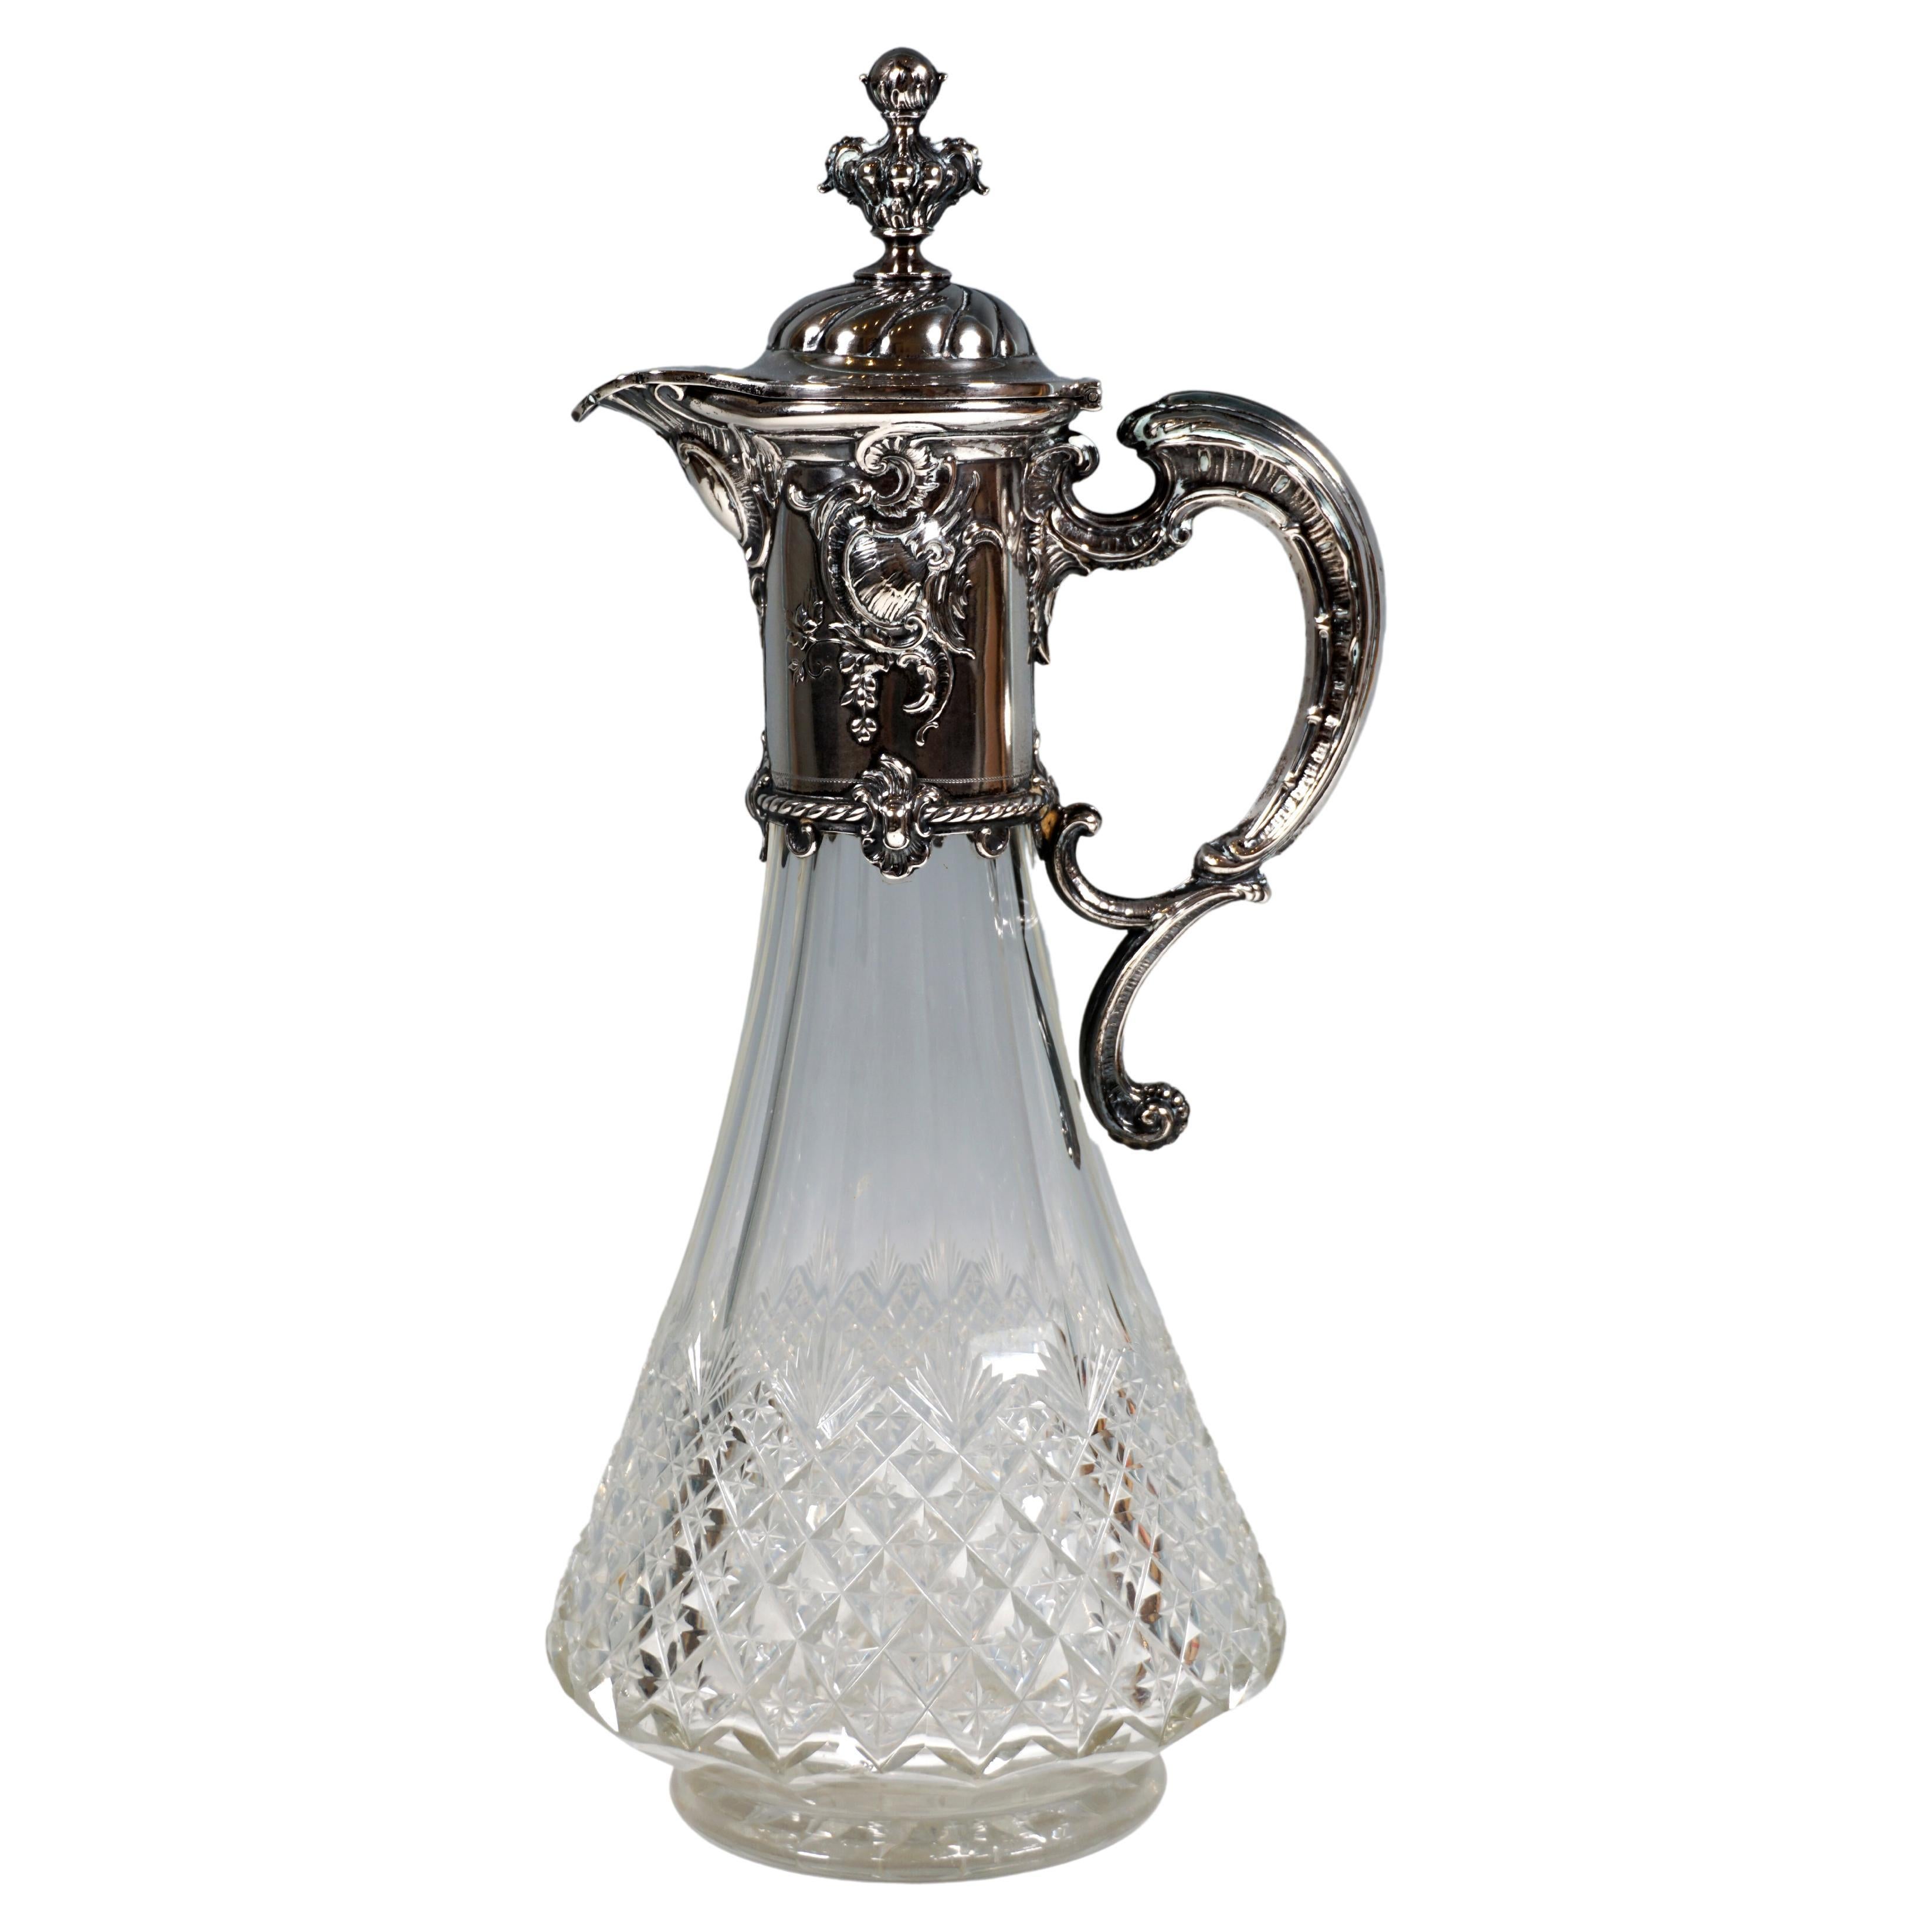 Art Nouveau Cut Glass Carafe with Silver Mount, Germany, Around 1900